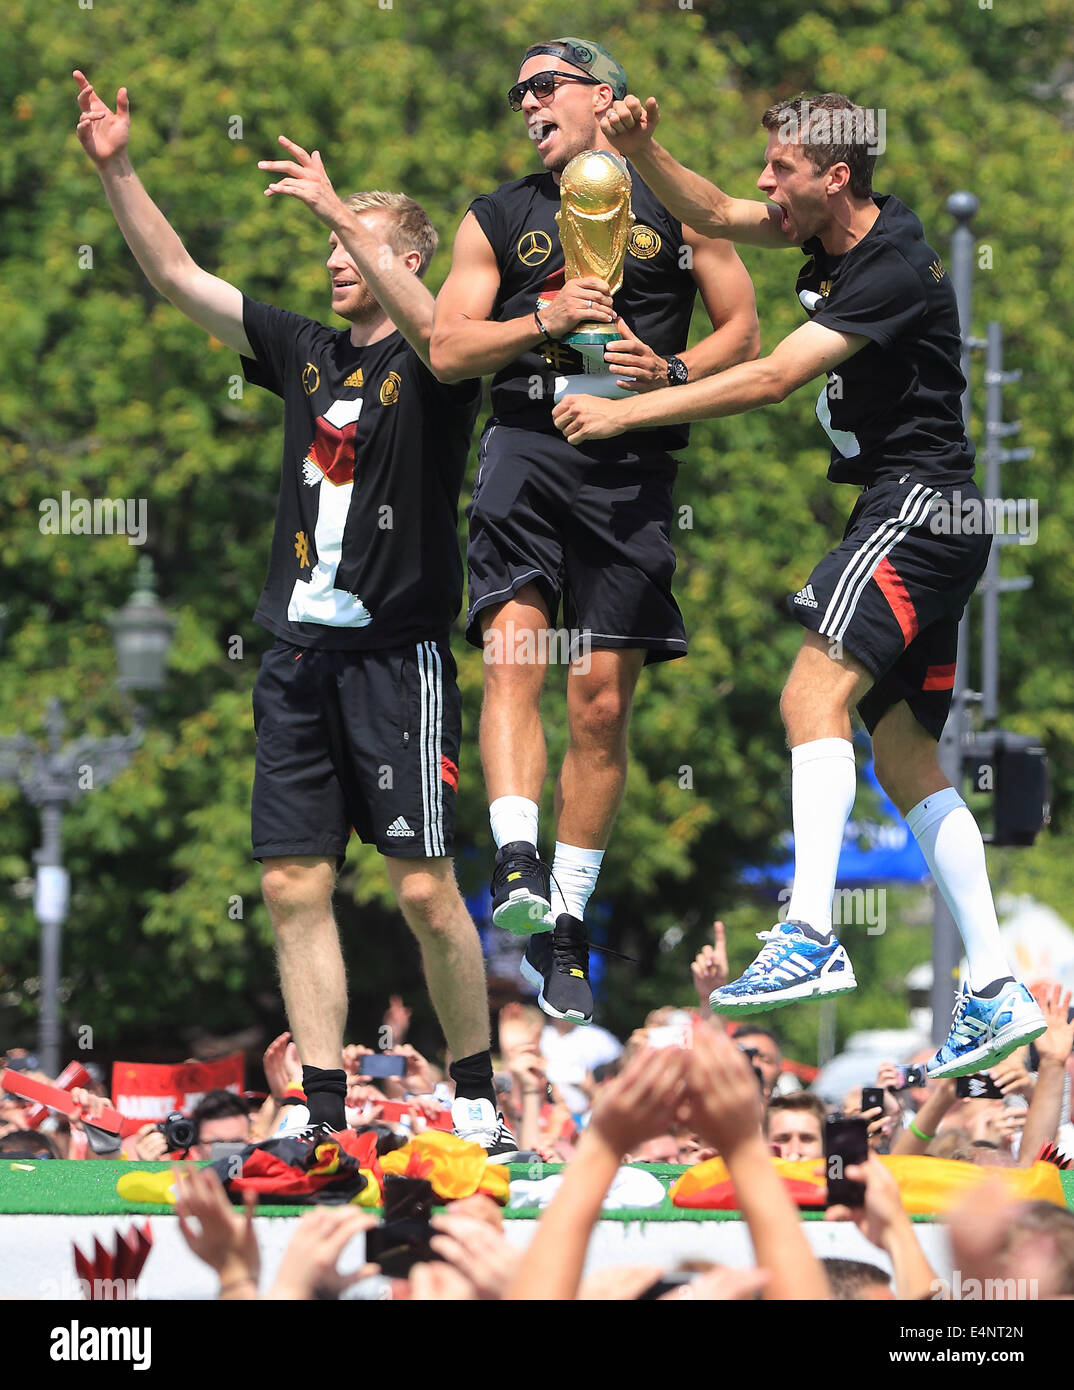 Berlin, Germany. 15th July, 2014. Germany's Per Mertesacker (L-R), Lukas Podolski, holding the World Cup trophy in his hands, and Thomas Mueller cheer and celebrate on stage during the welcome reception for Germany's national soccer team in front of the Brandenburg Gate, Berlin, Germany, 15 July 2014. The German team won the Brazil 2014 FIFA Soccer World Cup final against Argentina by 1-0 on 13 July 2014, winning the world cup title for the fourth time after 1954, 1974 and 1990. Photo: Jens Wolf/dpa/Alamy Live News Stock Photo